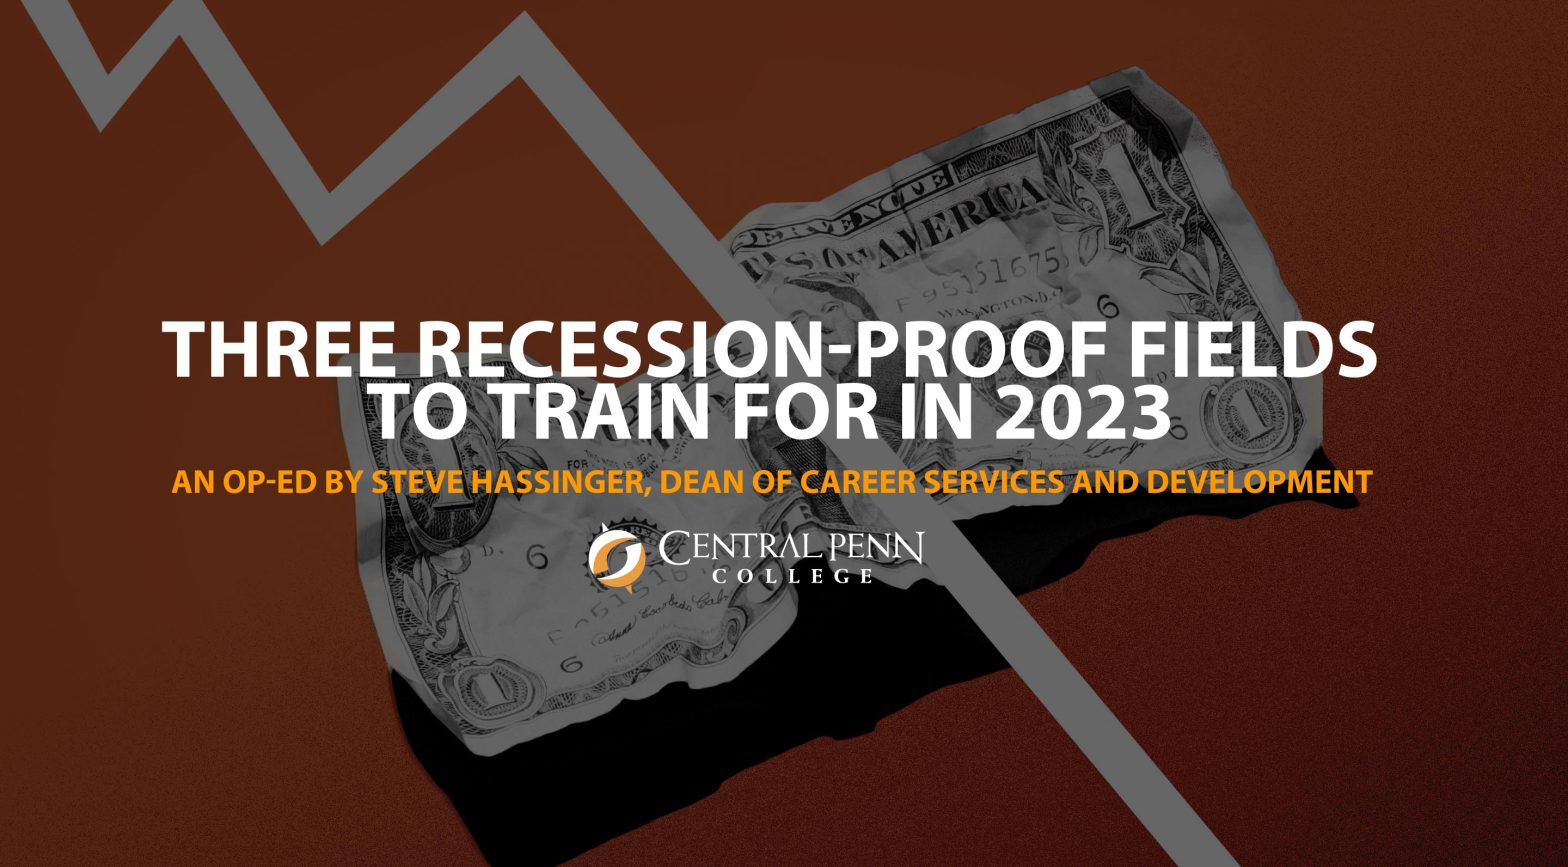 As our energy bills soar and retirement accounts shrink, a recent report sheds some light on three growing fields that are predicted to be virtually recession-proof in 2023.